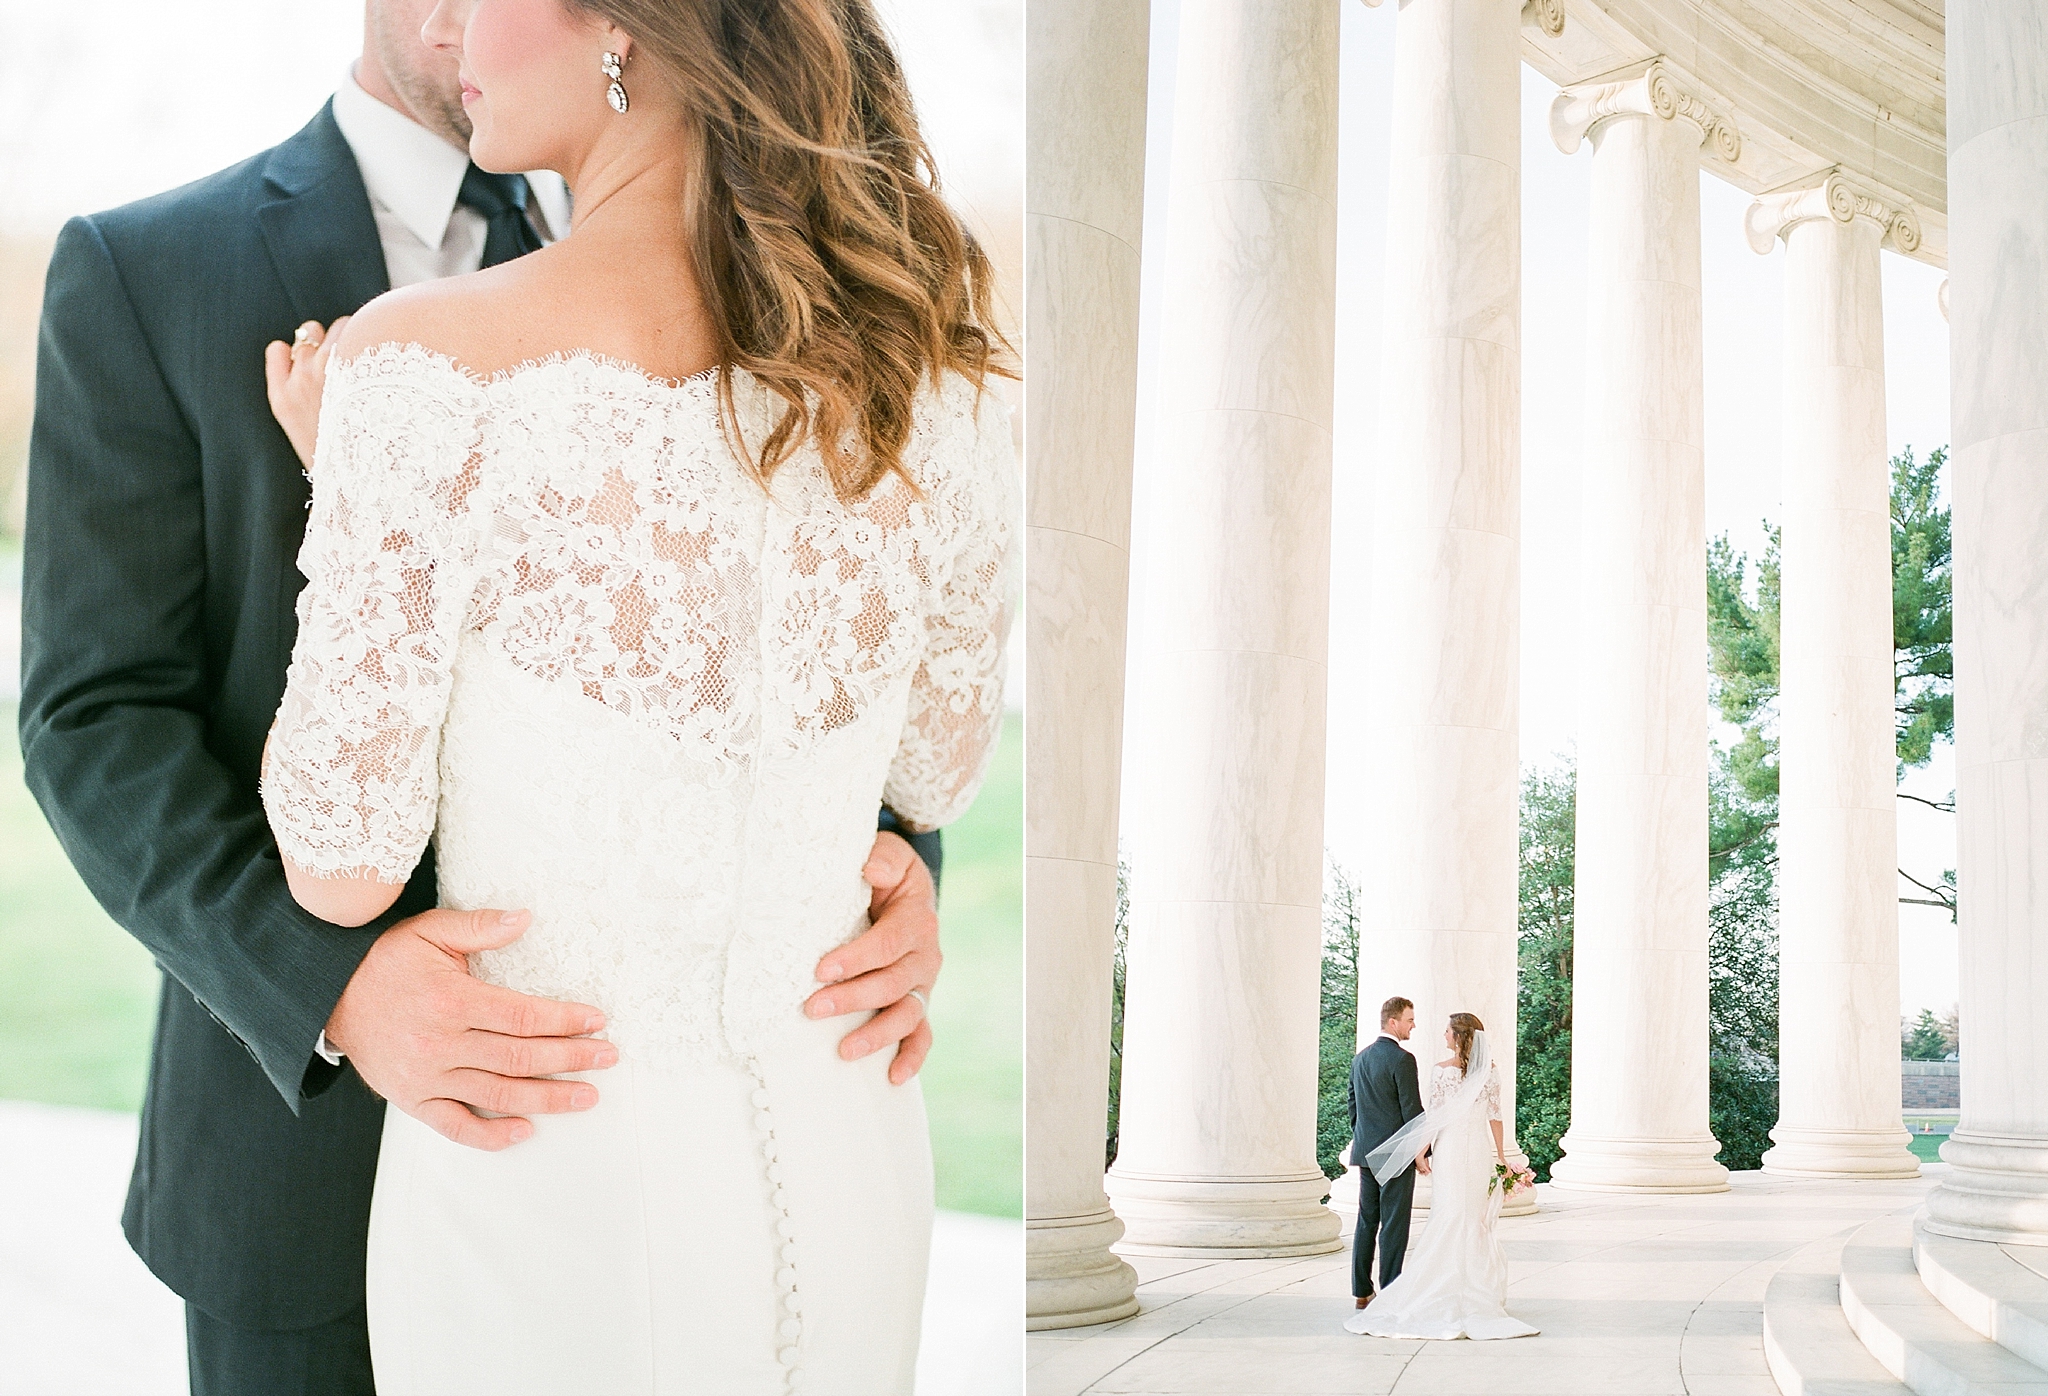 Home to Our Nation's Capital, DC is host to many weekend events, festivals, and parades. This wedding photographer is sharing a few you may want to avoid for your big day.  